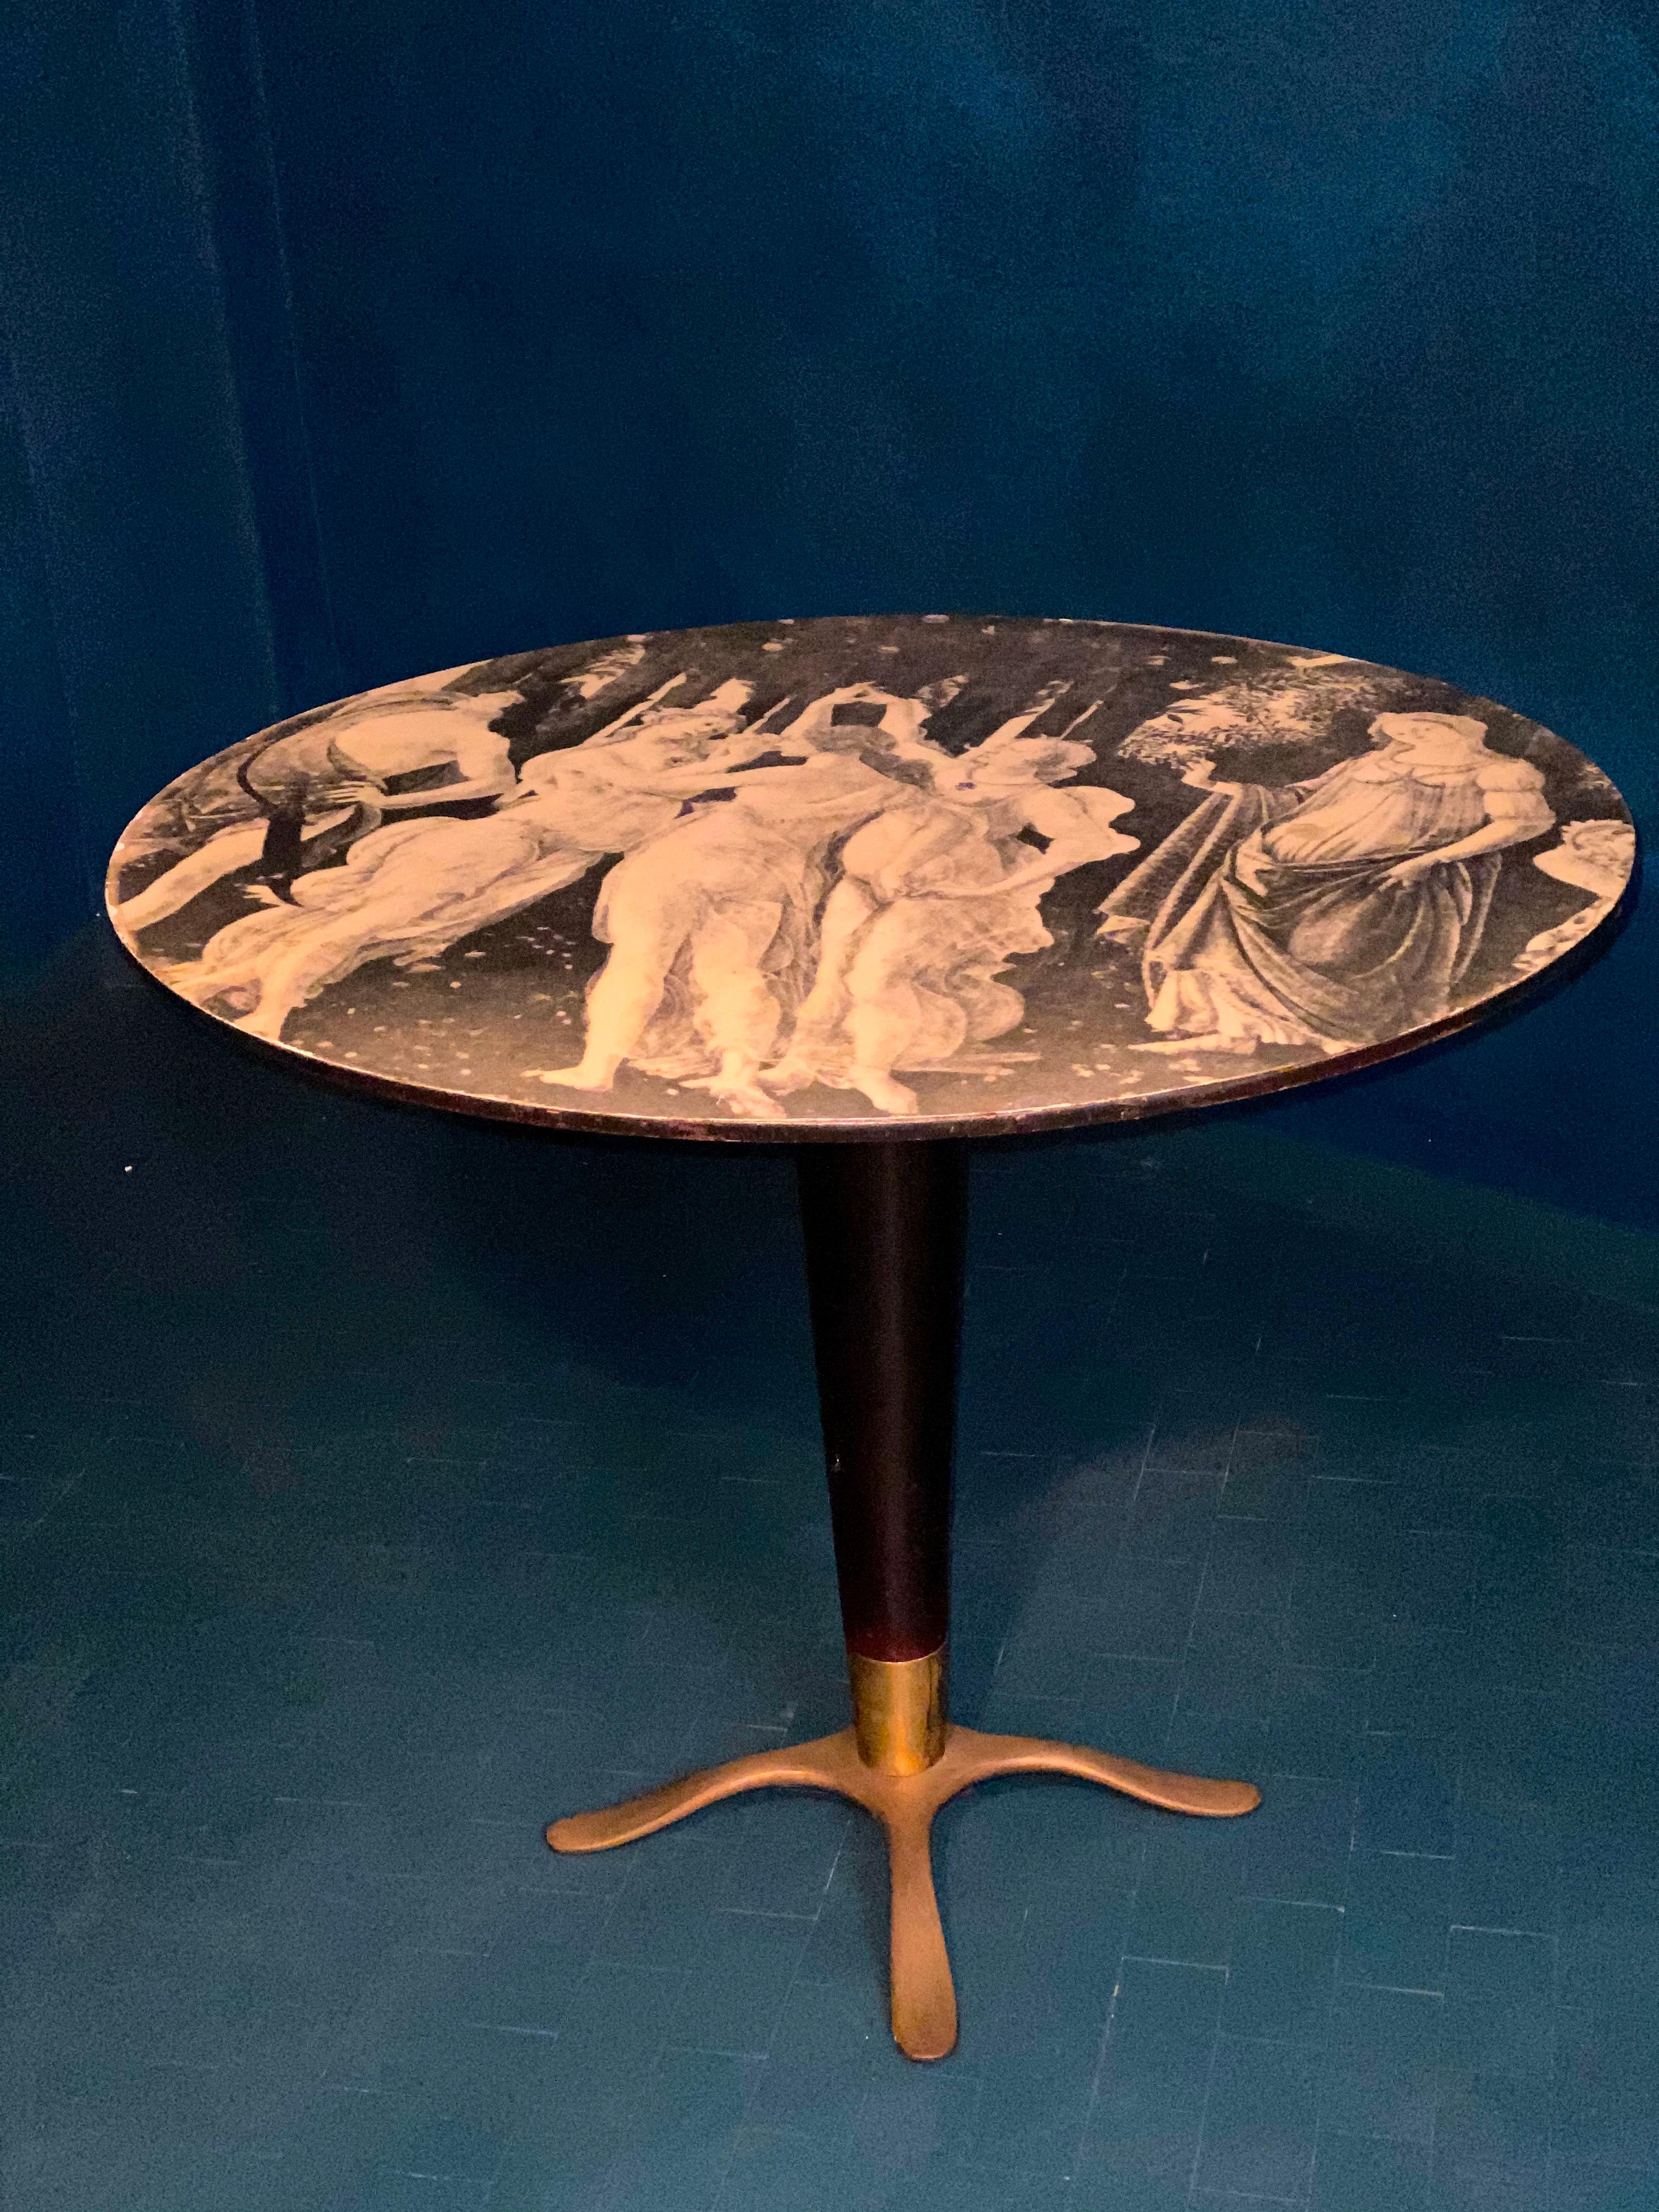 Elegant Italian center table or occasional table with brass tripod base.
The tabletop decoration with Boticelli lithographic print on lacquered wood base and glass top.
 Very good vintage condition 